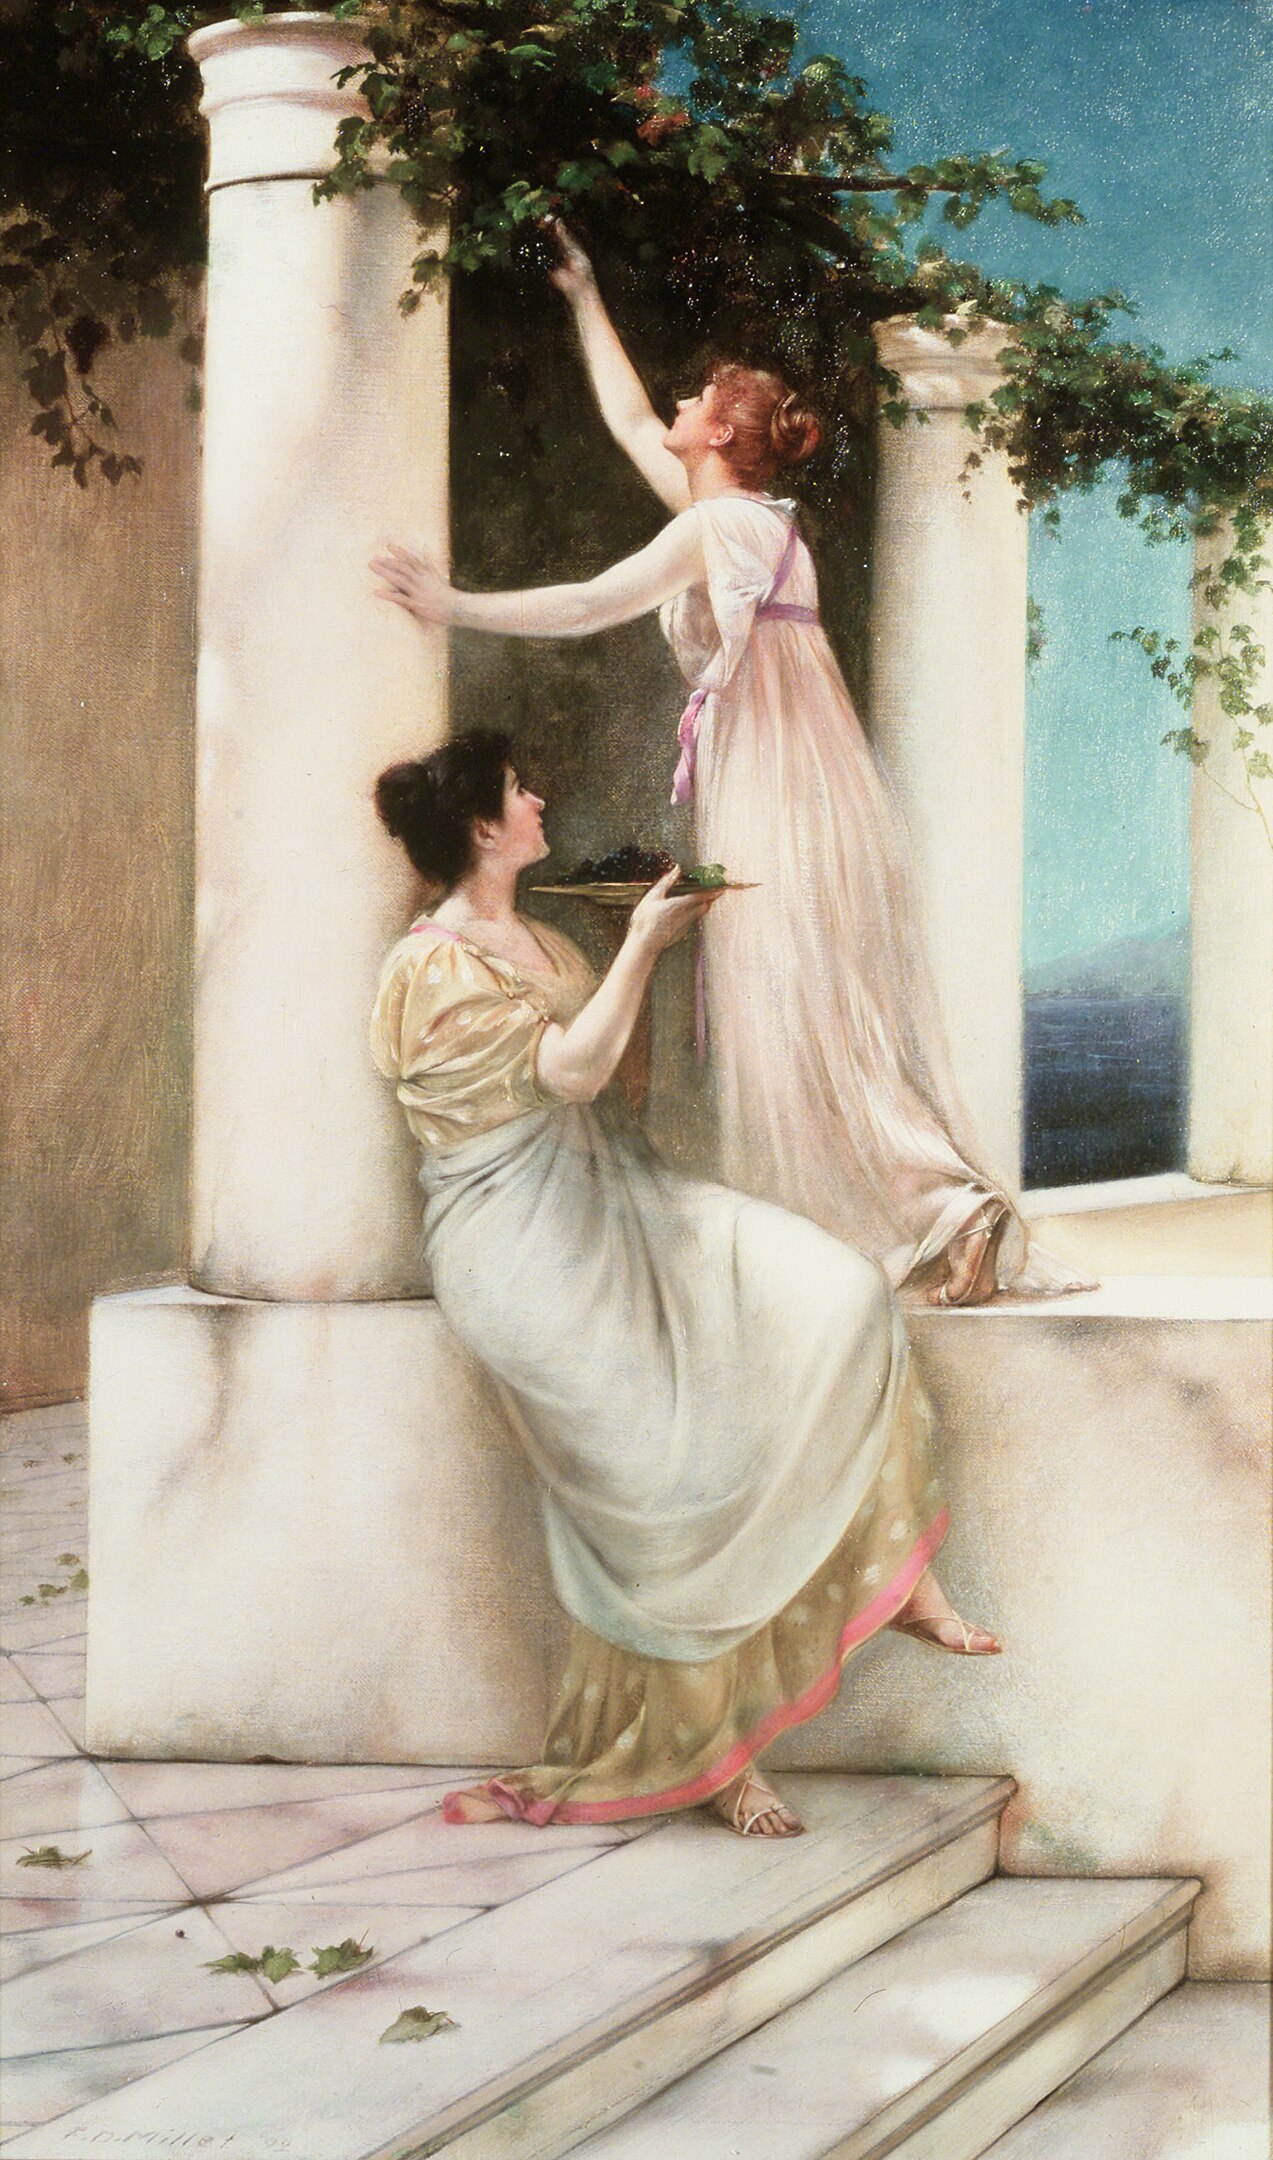 Two women picking fruit from a tree; one stands on a ledge to reach the fruit while the other is seated below holding a plate on which the fruit is placed